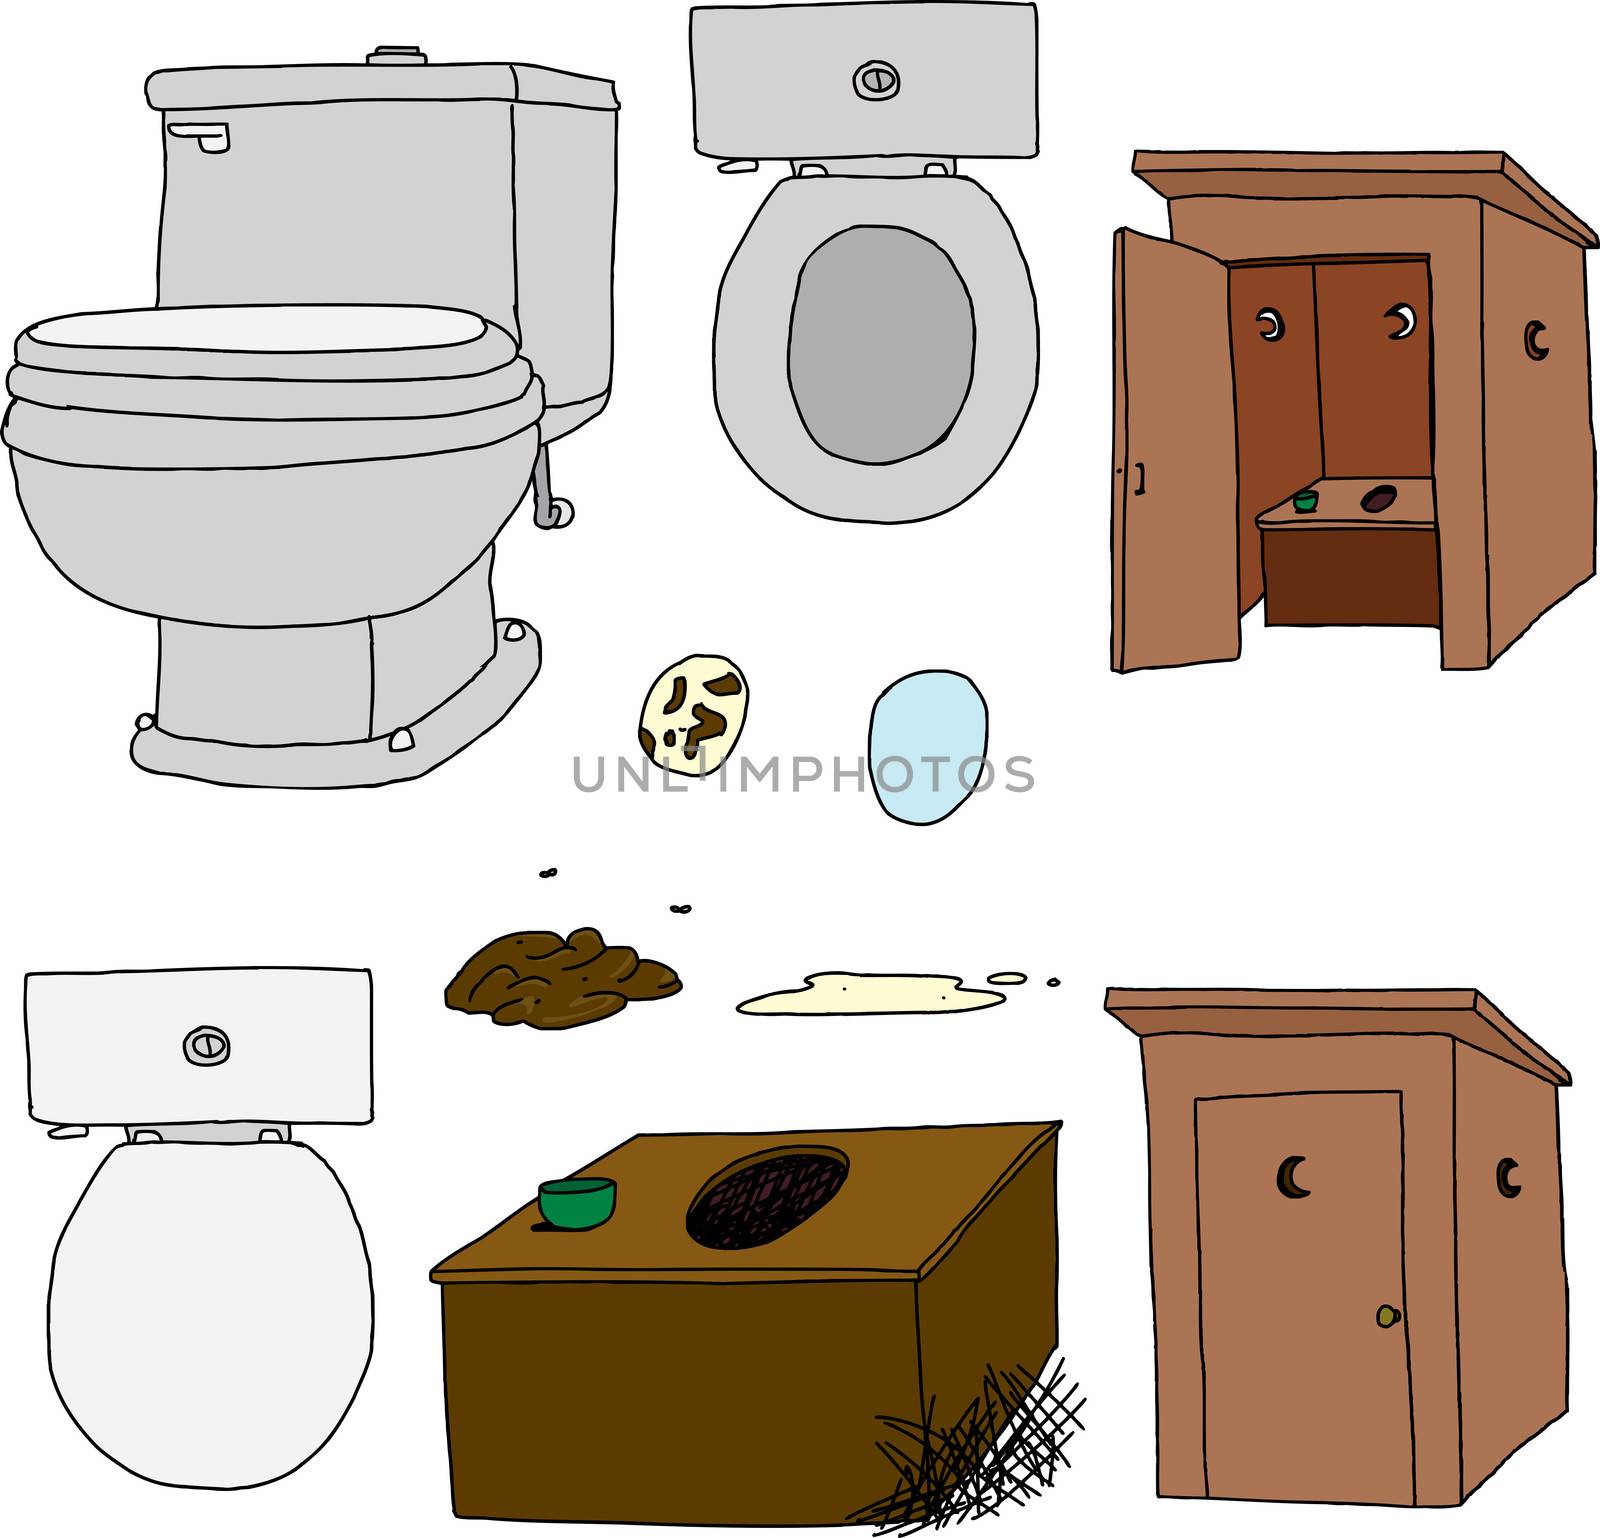 Toilet and outhouse Illustrations by TheBlackRhino